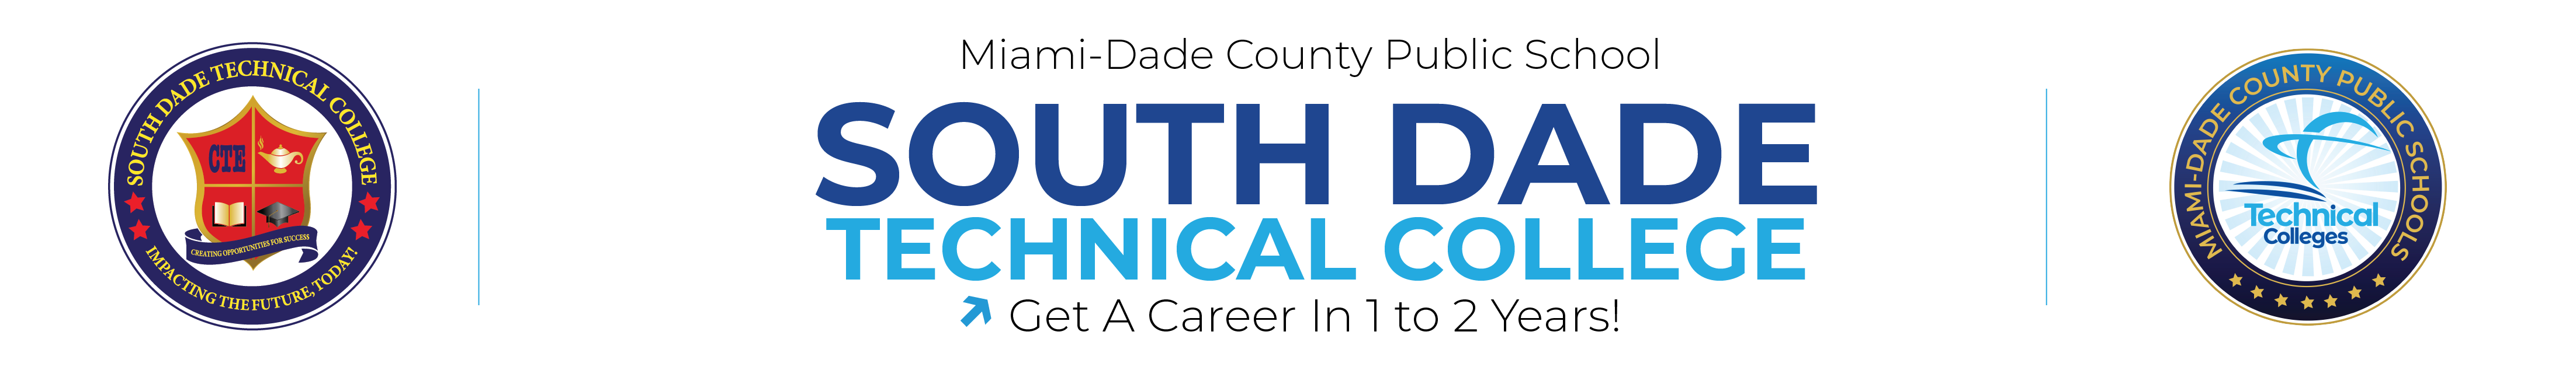 South Dade Technical College